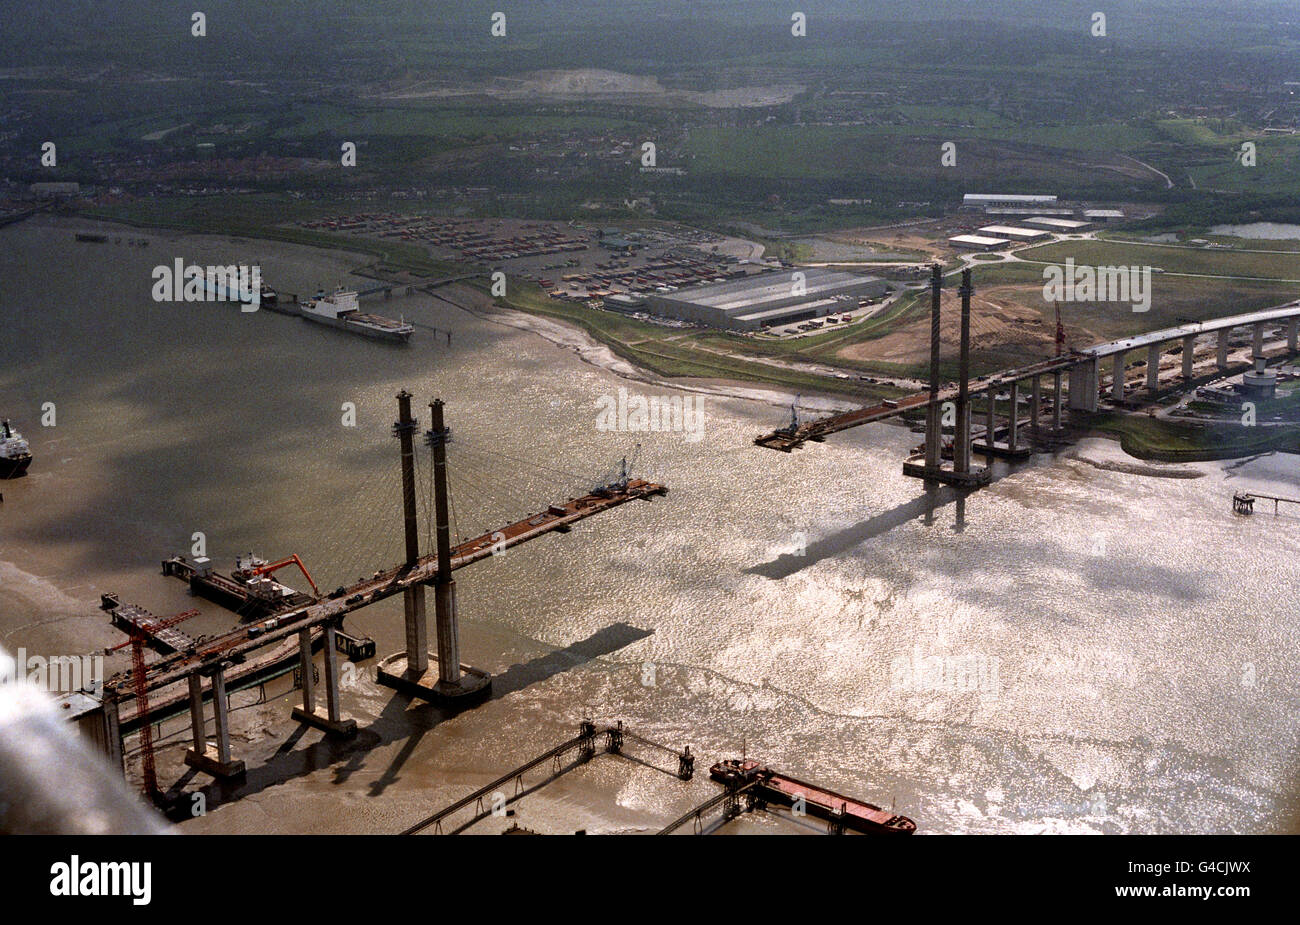 PA NEWS PHOTO 28/4/91 THE 86 MILLION POUND DARTFORD BRIDGE 'THE QUEEN ELIZABETH II BRIDGE' OVER THE RIVER THAMES, BEING BUILT, NEARING COMPLETION. Stock Photo